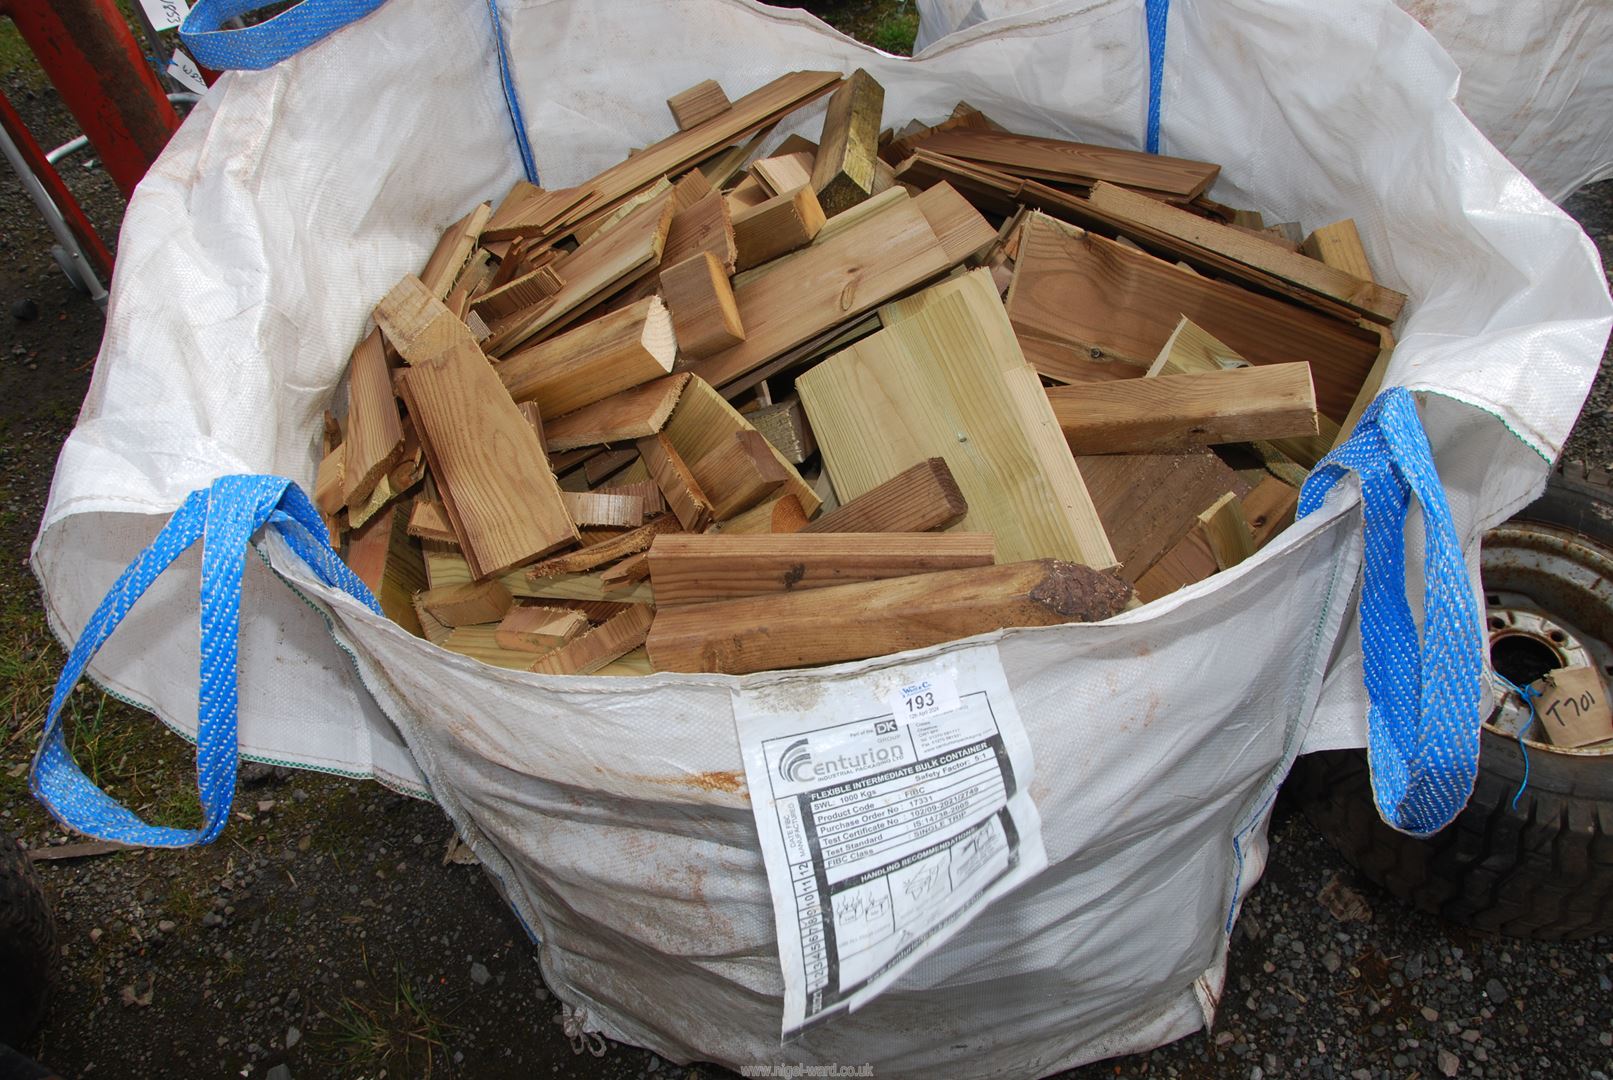 A large bag of softwood offcuts.